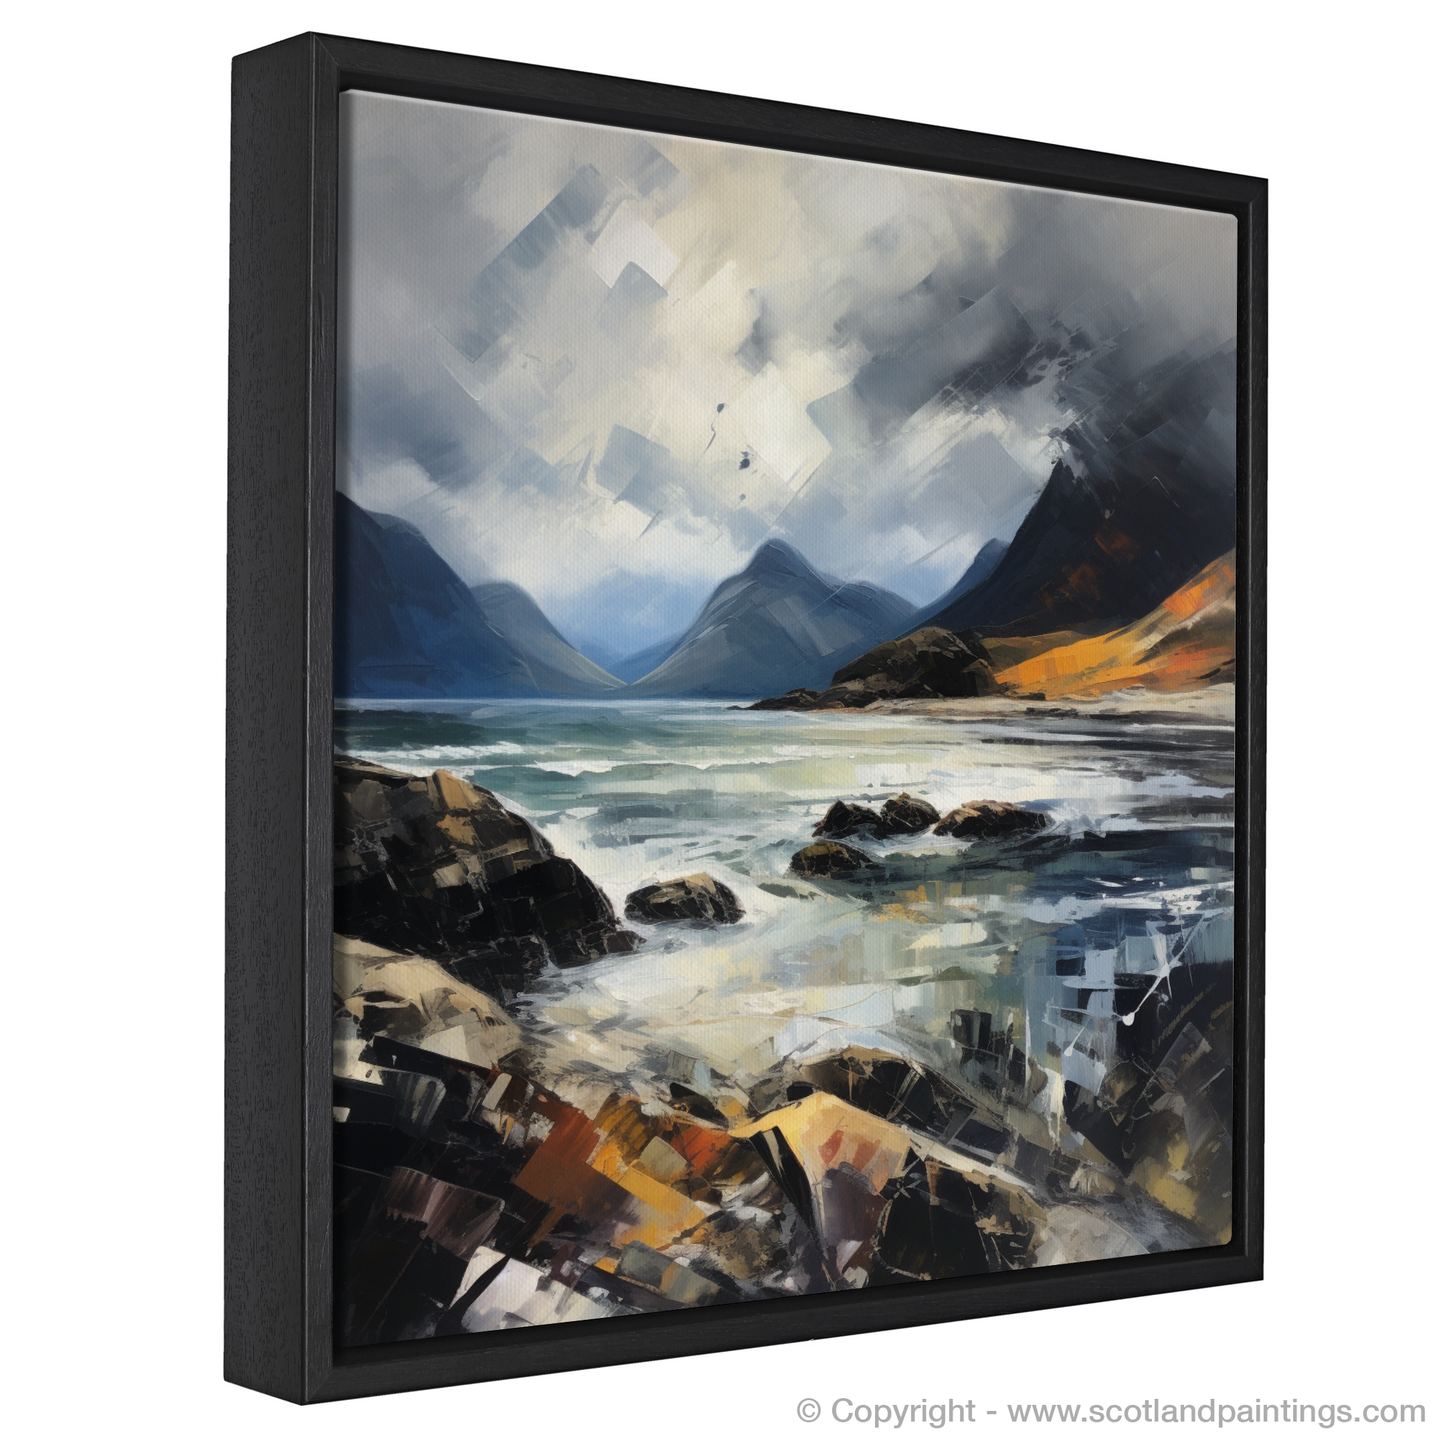 Painting and Art Print of Elgol Bay with a stormy sky entitled "Storm's Symphony over Elgol Bay".